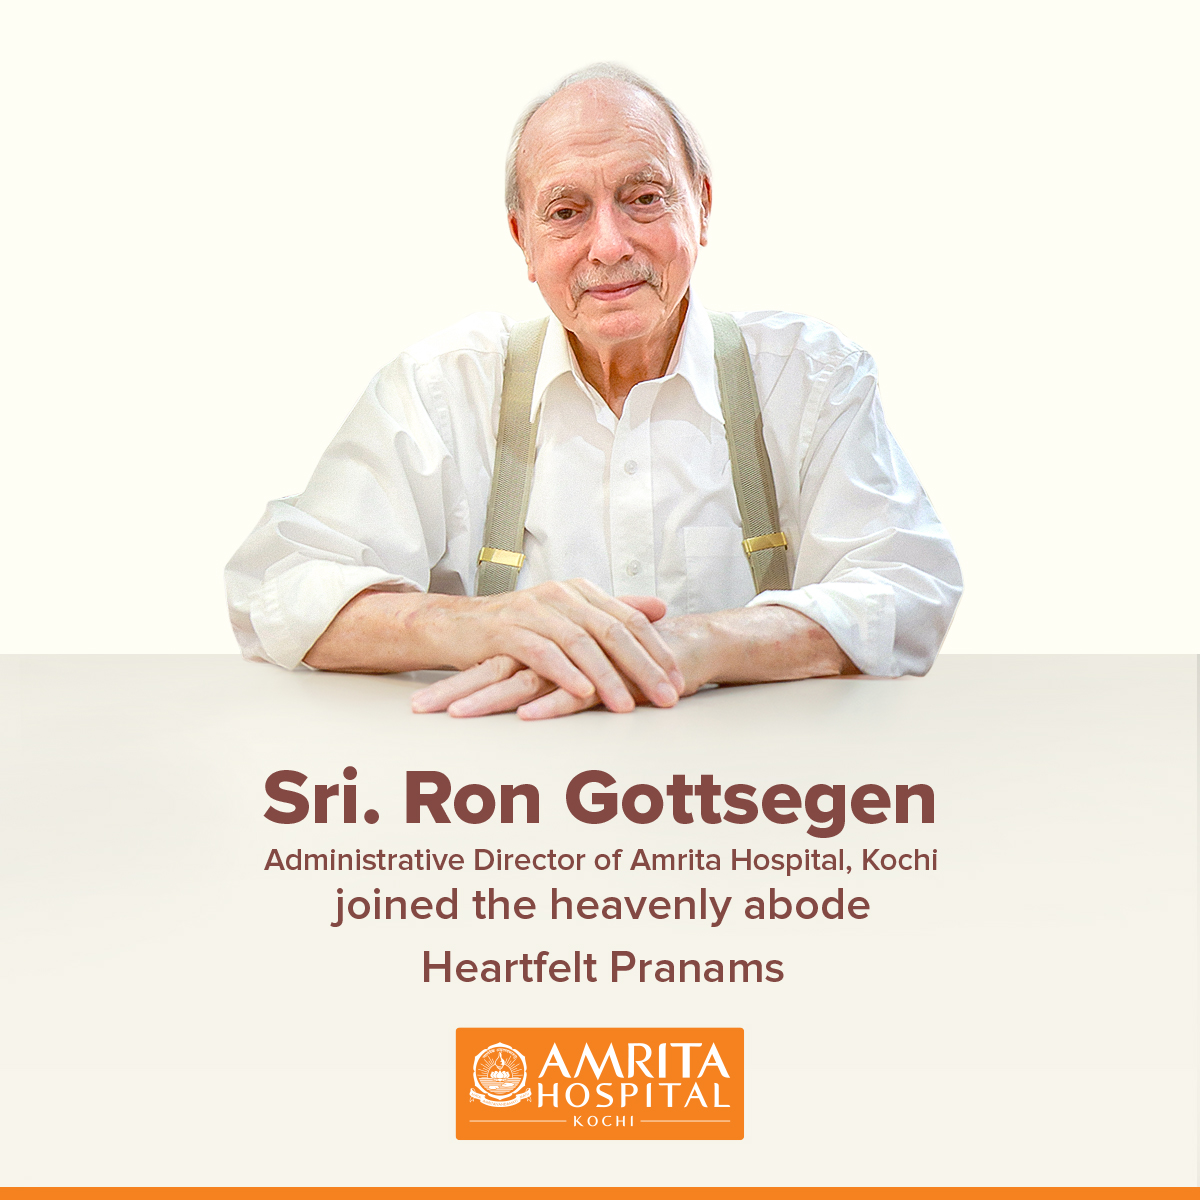 Sri Ron Gottsegen, Administrative Director of Amrita Hospital, Kochi, merged with the Divine on Friday morning. He died peacefully at Amritapuri Ashram, aged 86. Amrita family profoundly mourns the passing of a cherished Sevak and a much-loved brother.